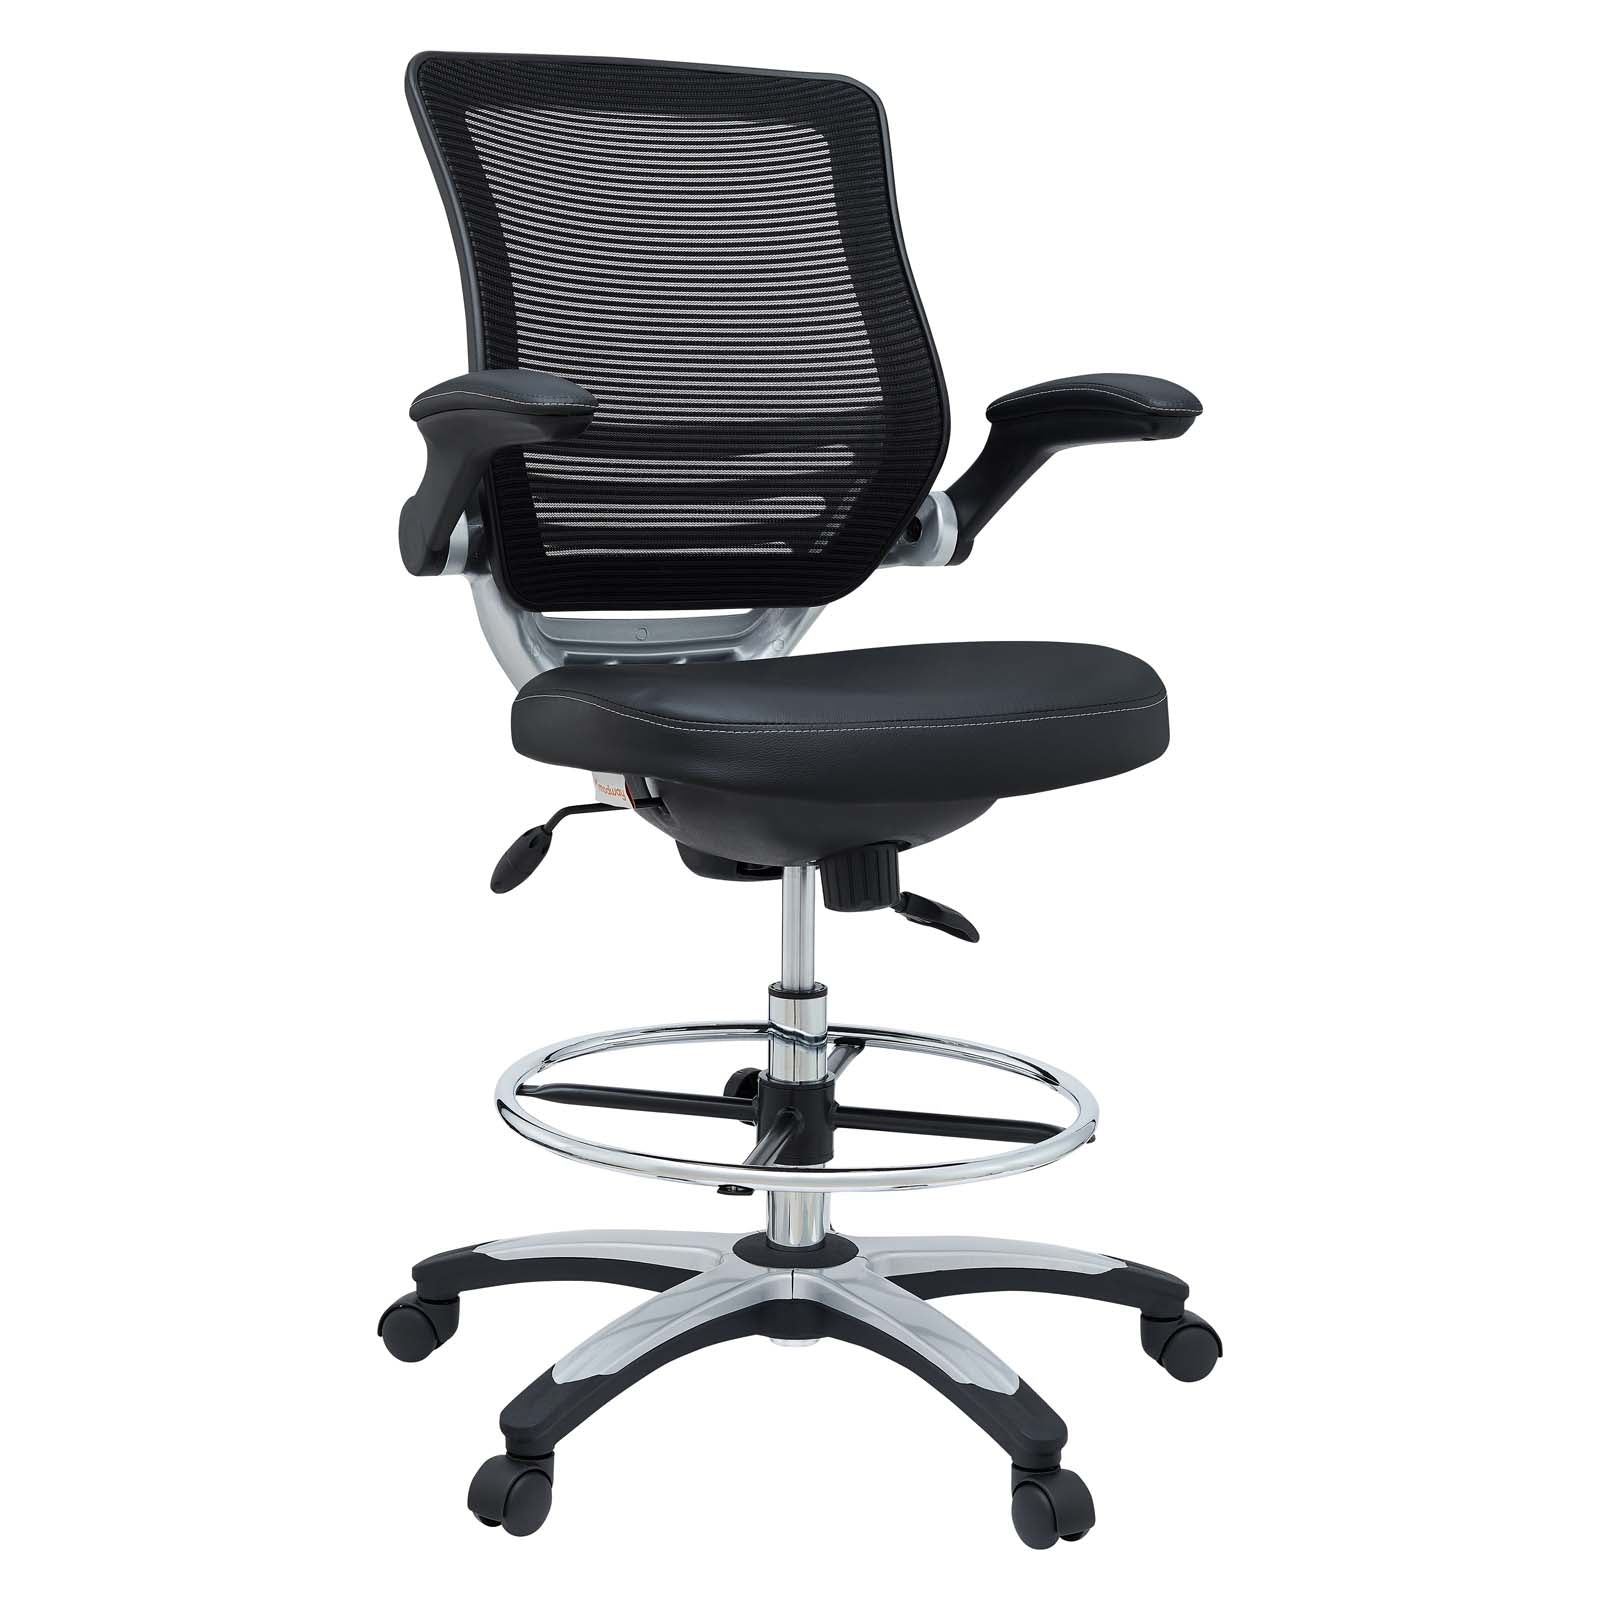 Modway Edge Drafting Chair – Reception Desk Chair